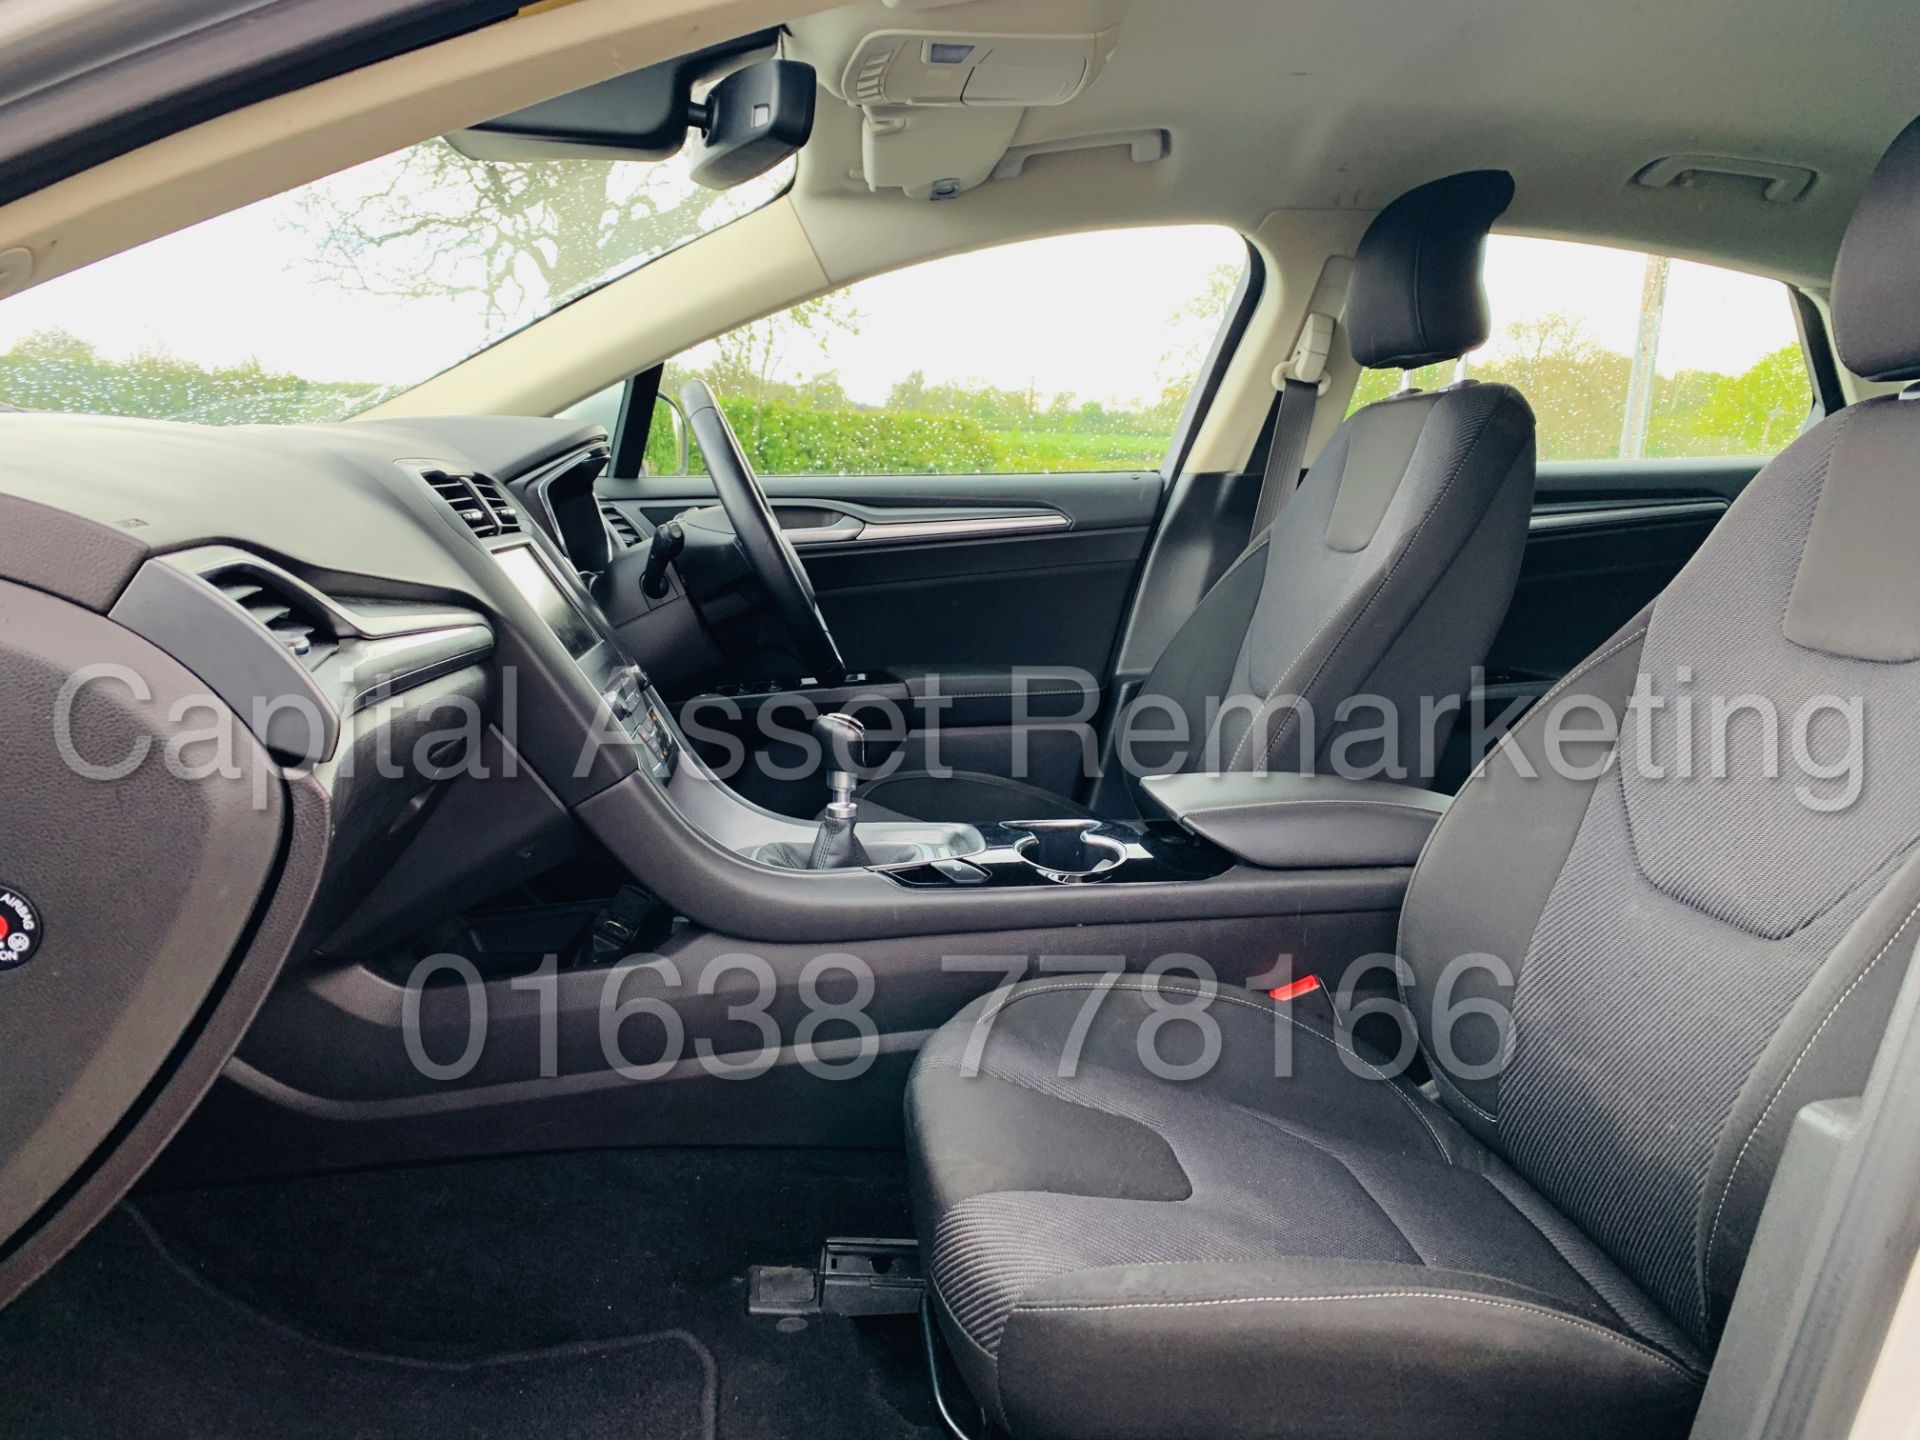 FORD MONDEO *TITANIUM* HATCHBACK (2016) '1.5 TDCI - EURO 6 - 6 SPEED' *1 OWNER - FULL HISTORY* - Image 24 of 46